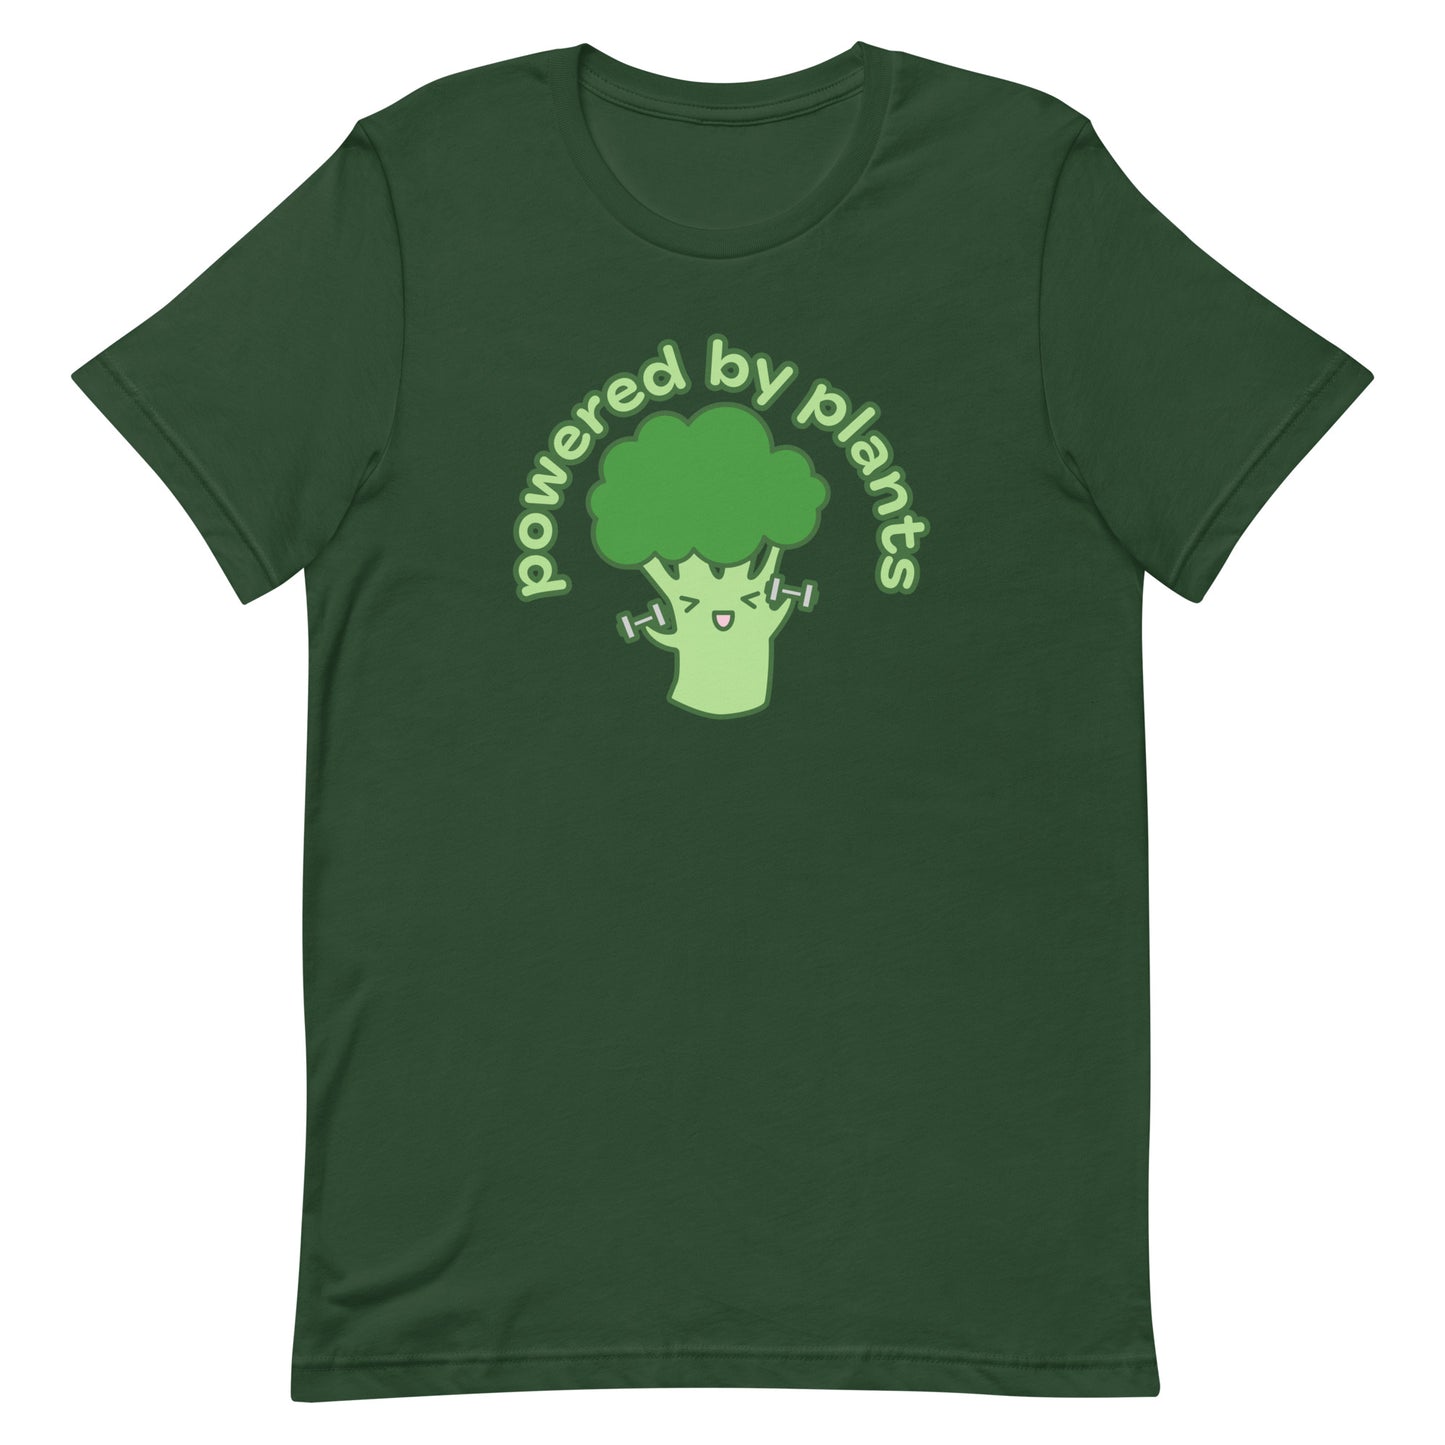 A dark green crewneck t-shirt featuring an illustration of a cartoon broccoli character. The broccoli is excitedly lifting weights, and text in an arc above the broccoli reads "powered by plants".